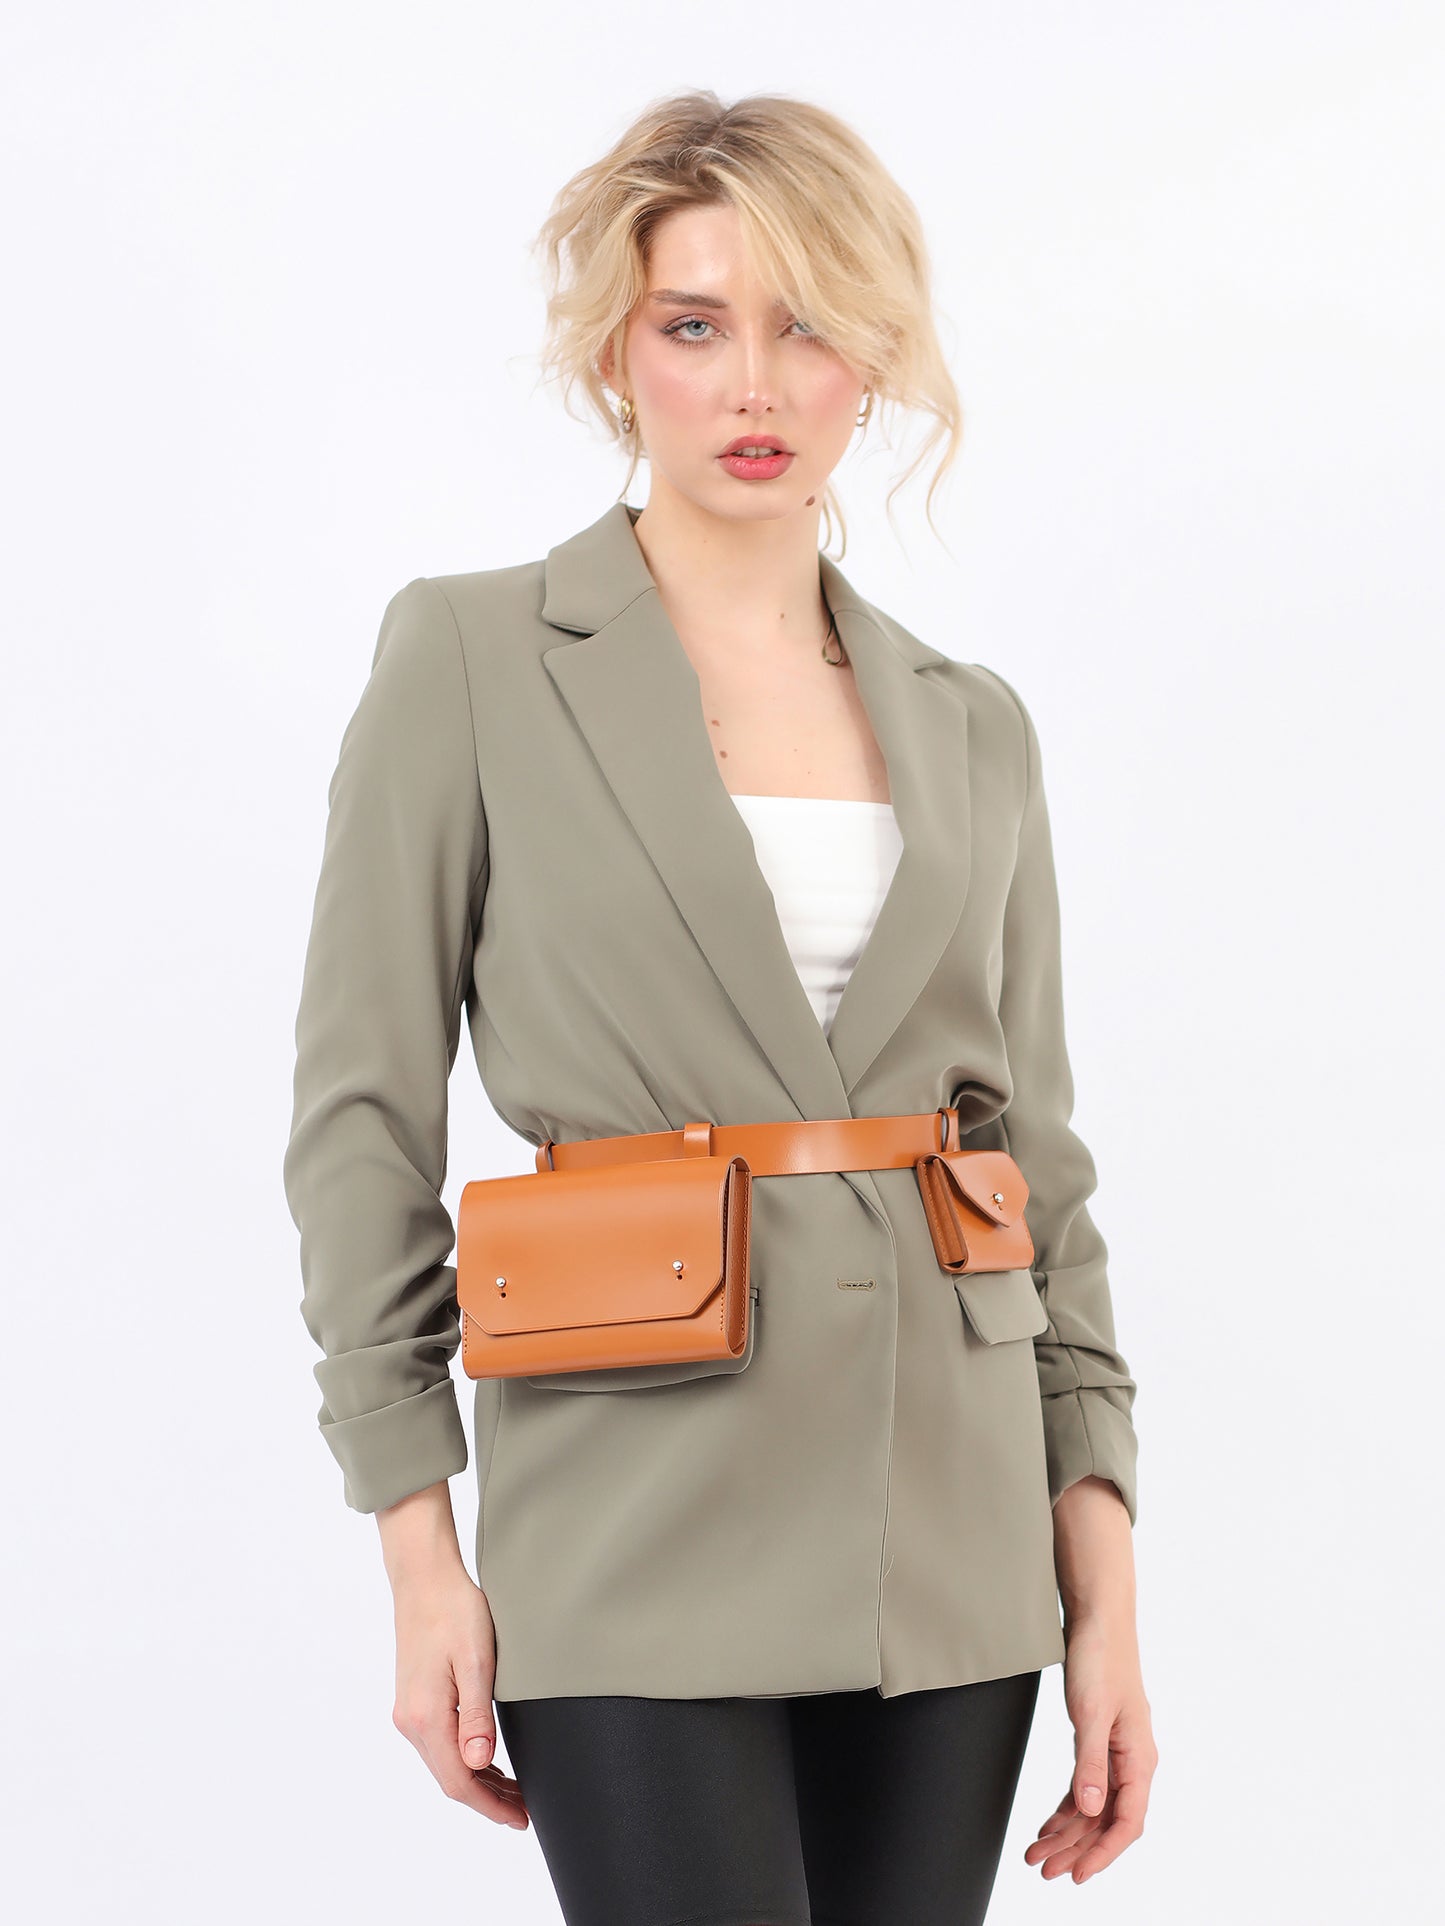 Brown double belt bag fitted on woman wearing green blazer.